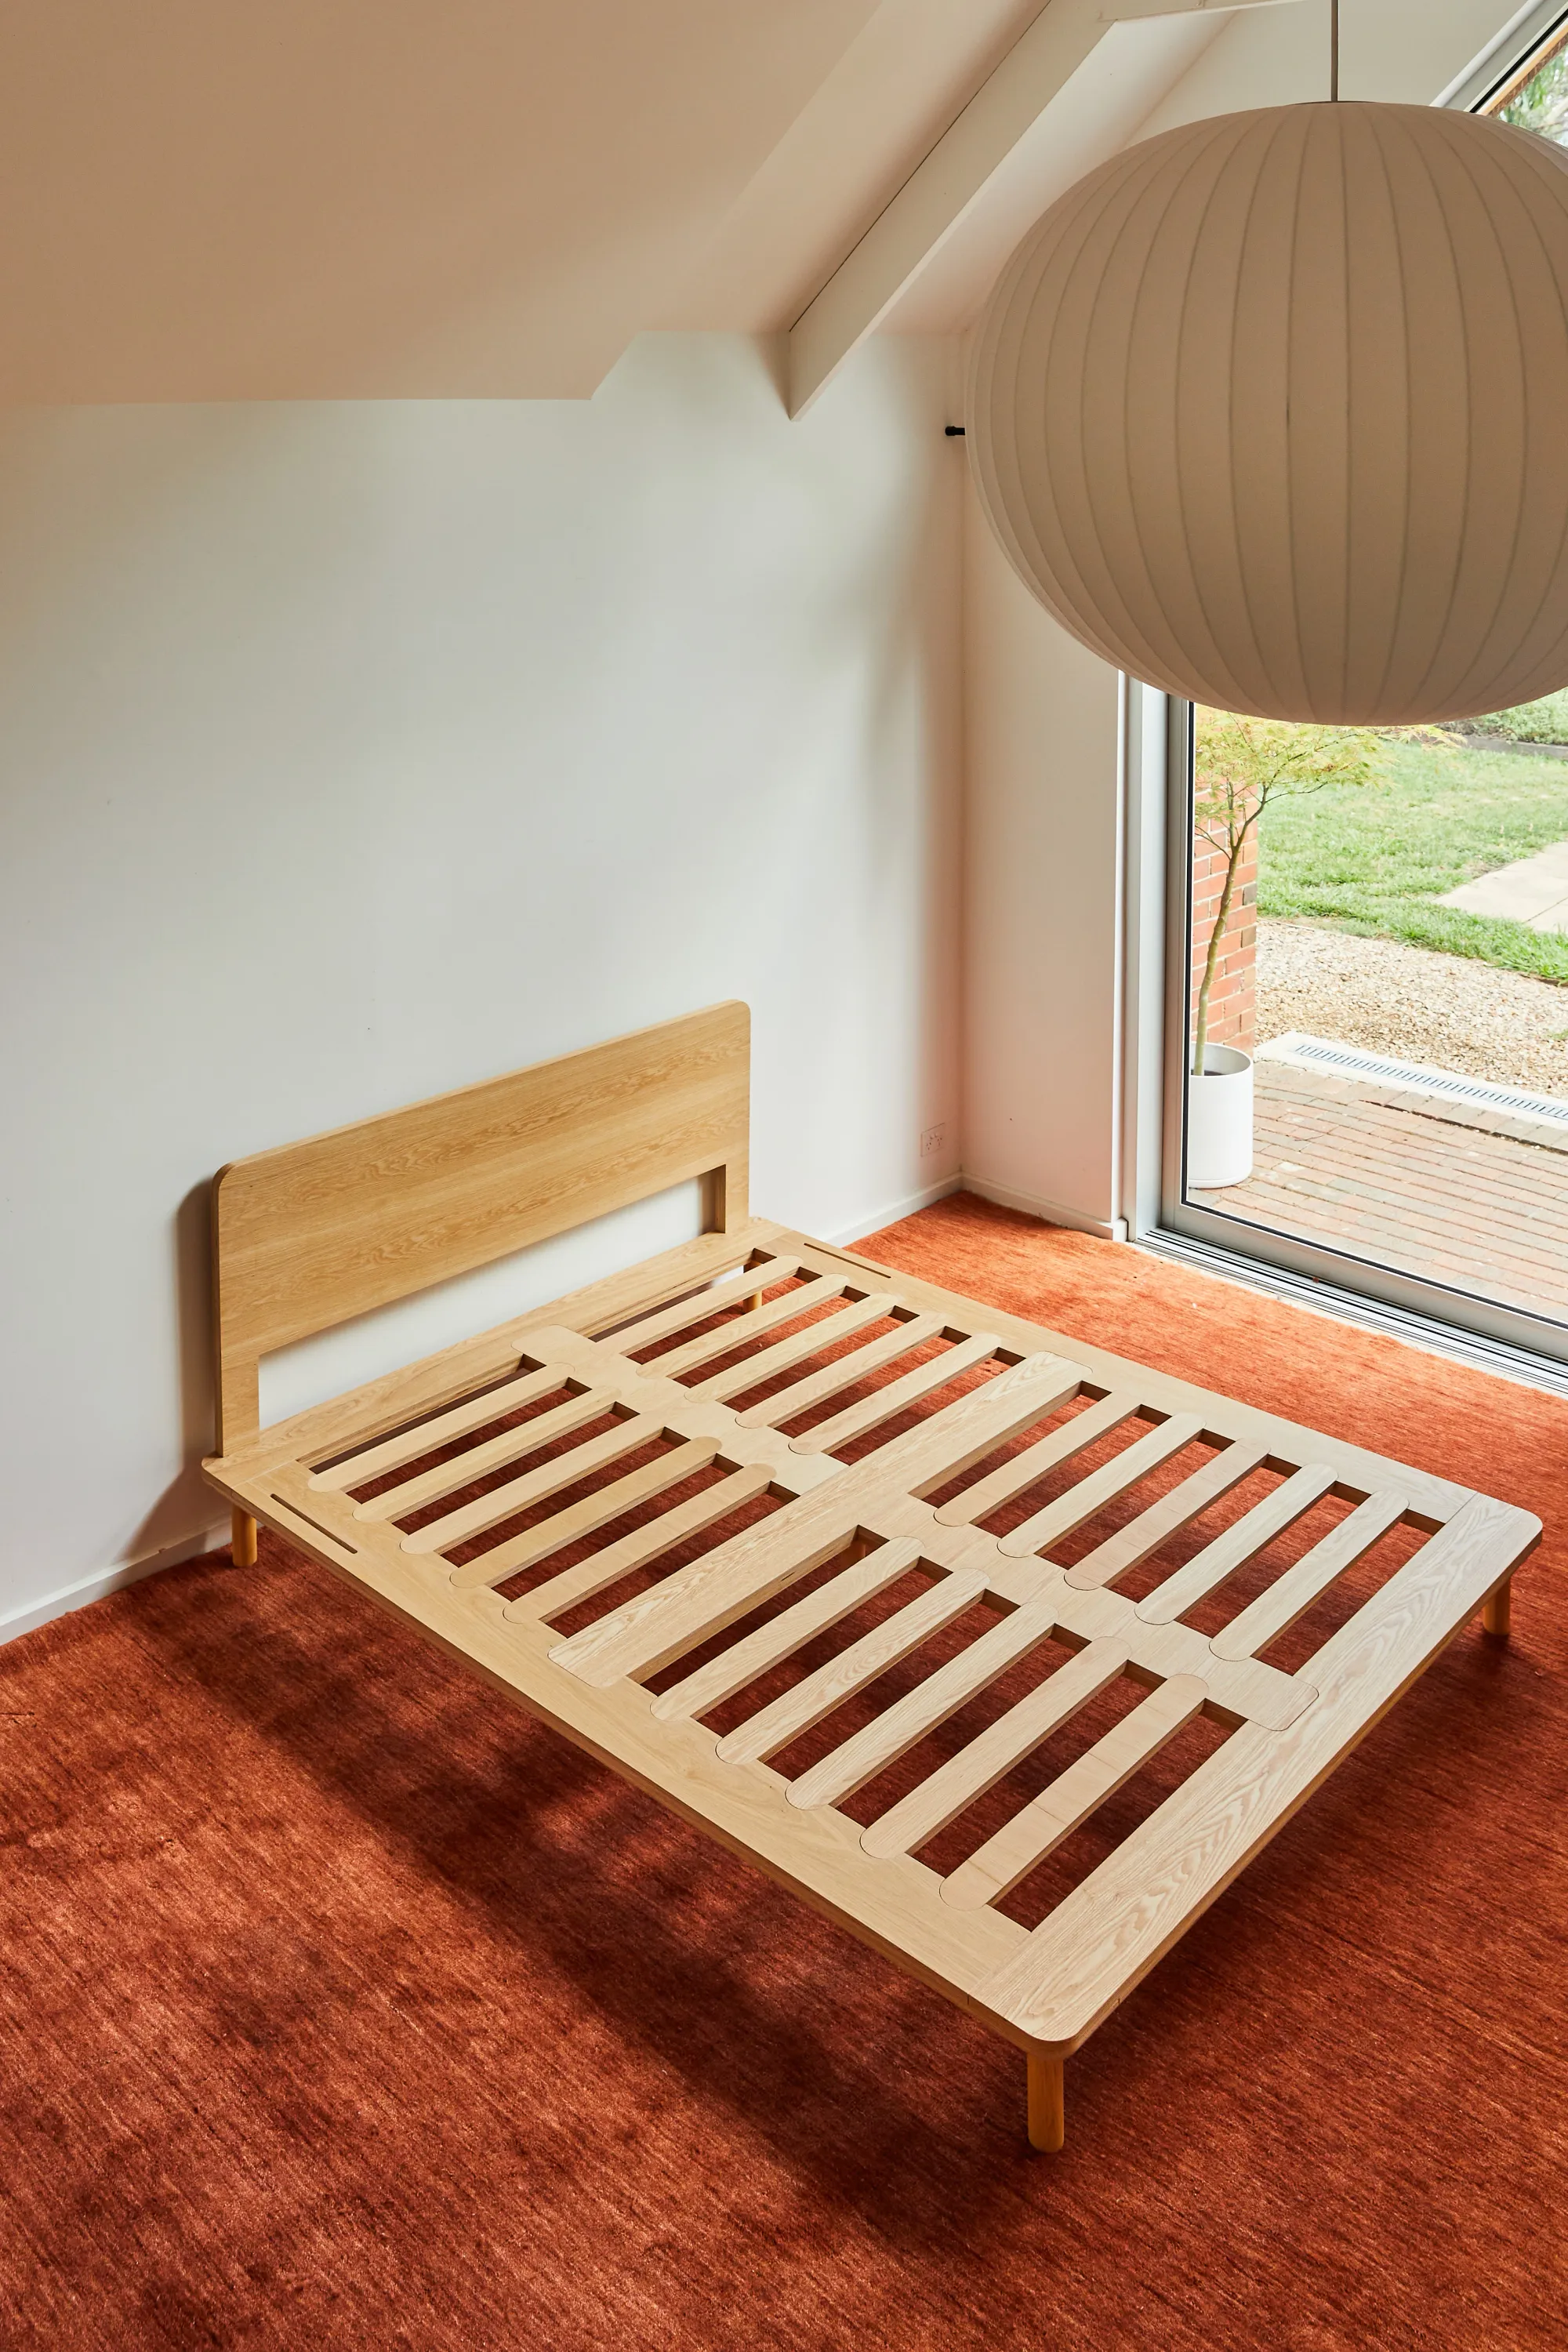 The Timber Bed Frame by Eva shown without a mattress on a red rug